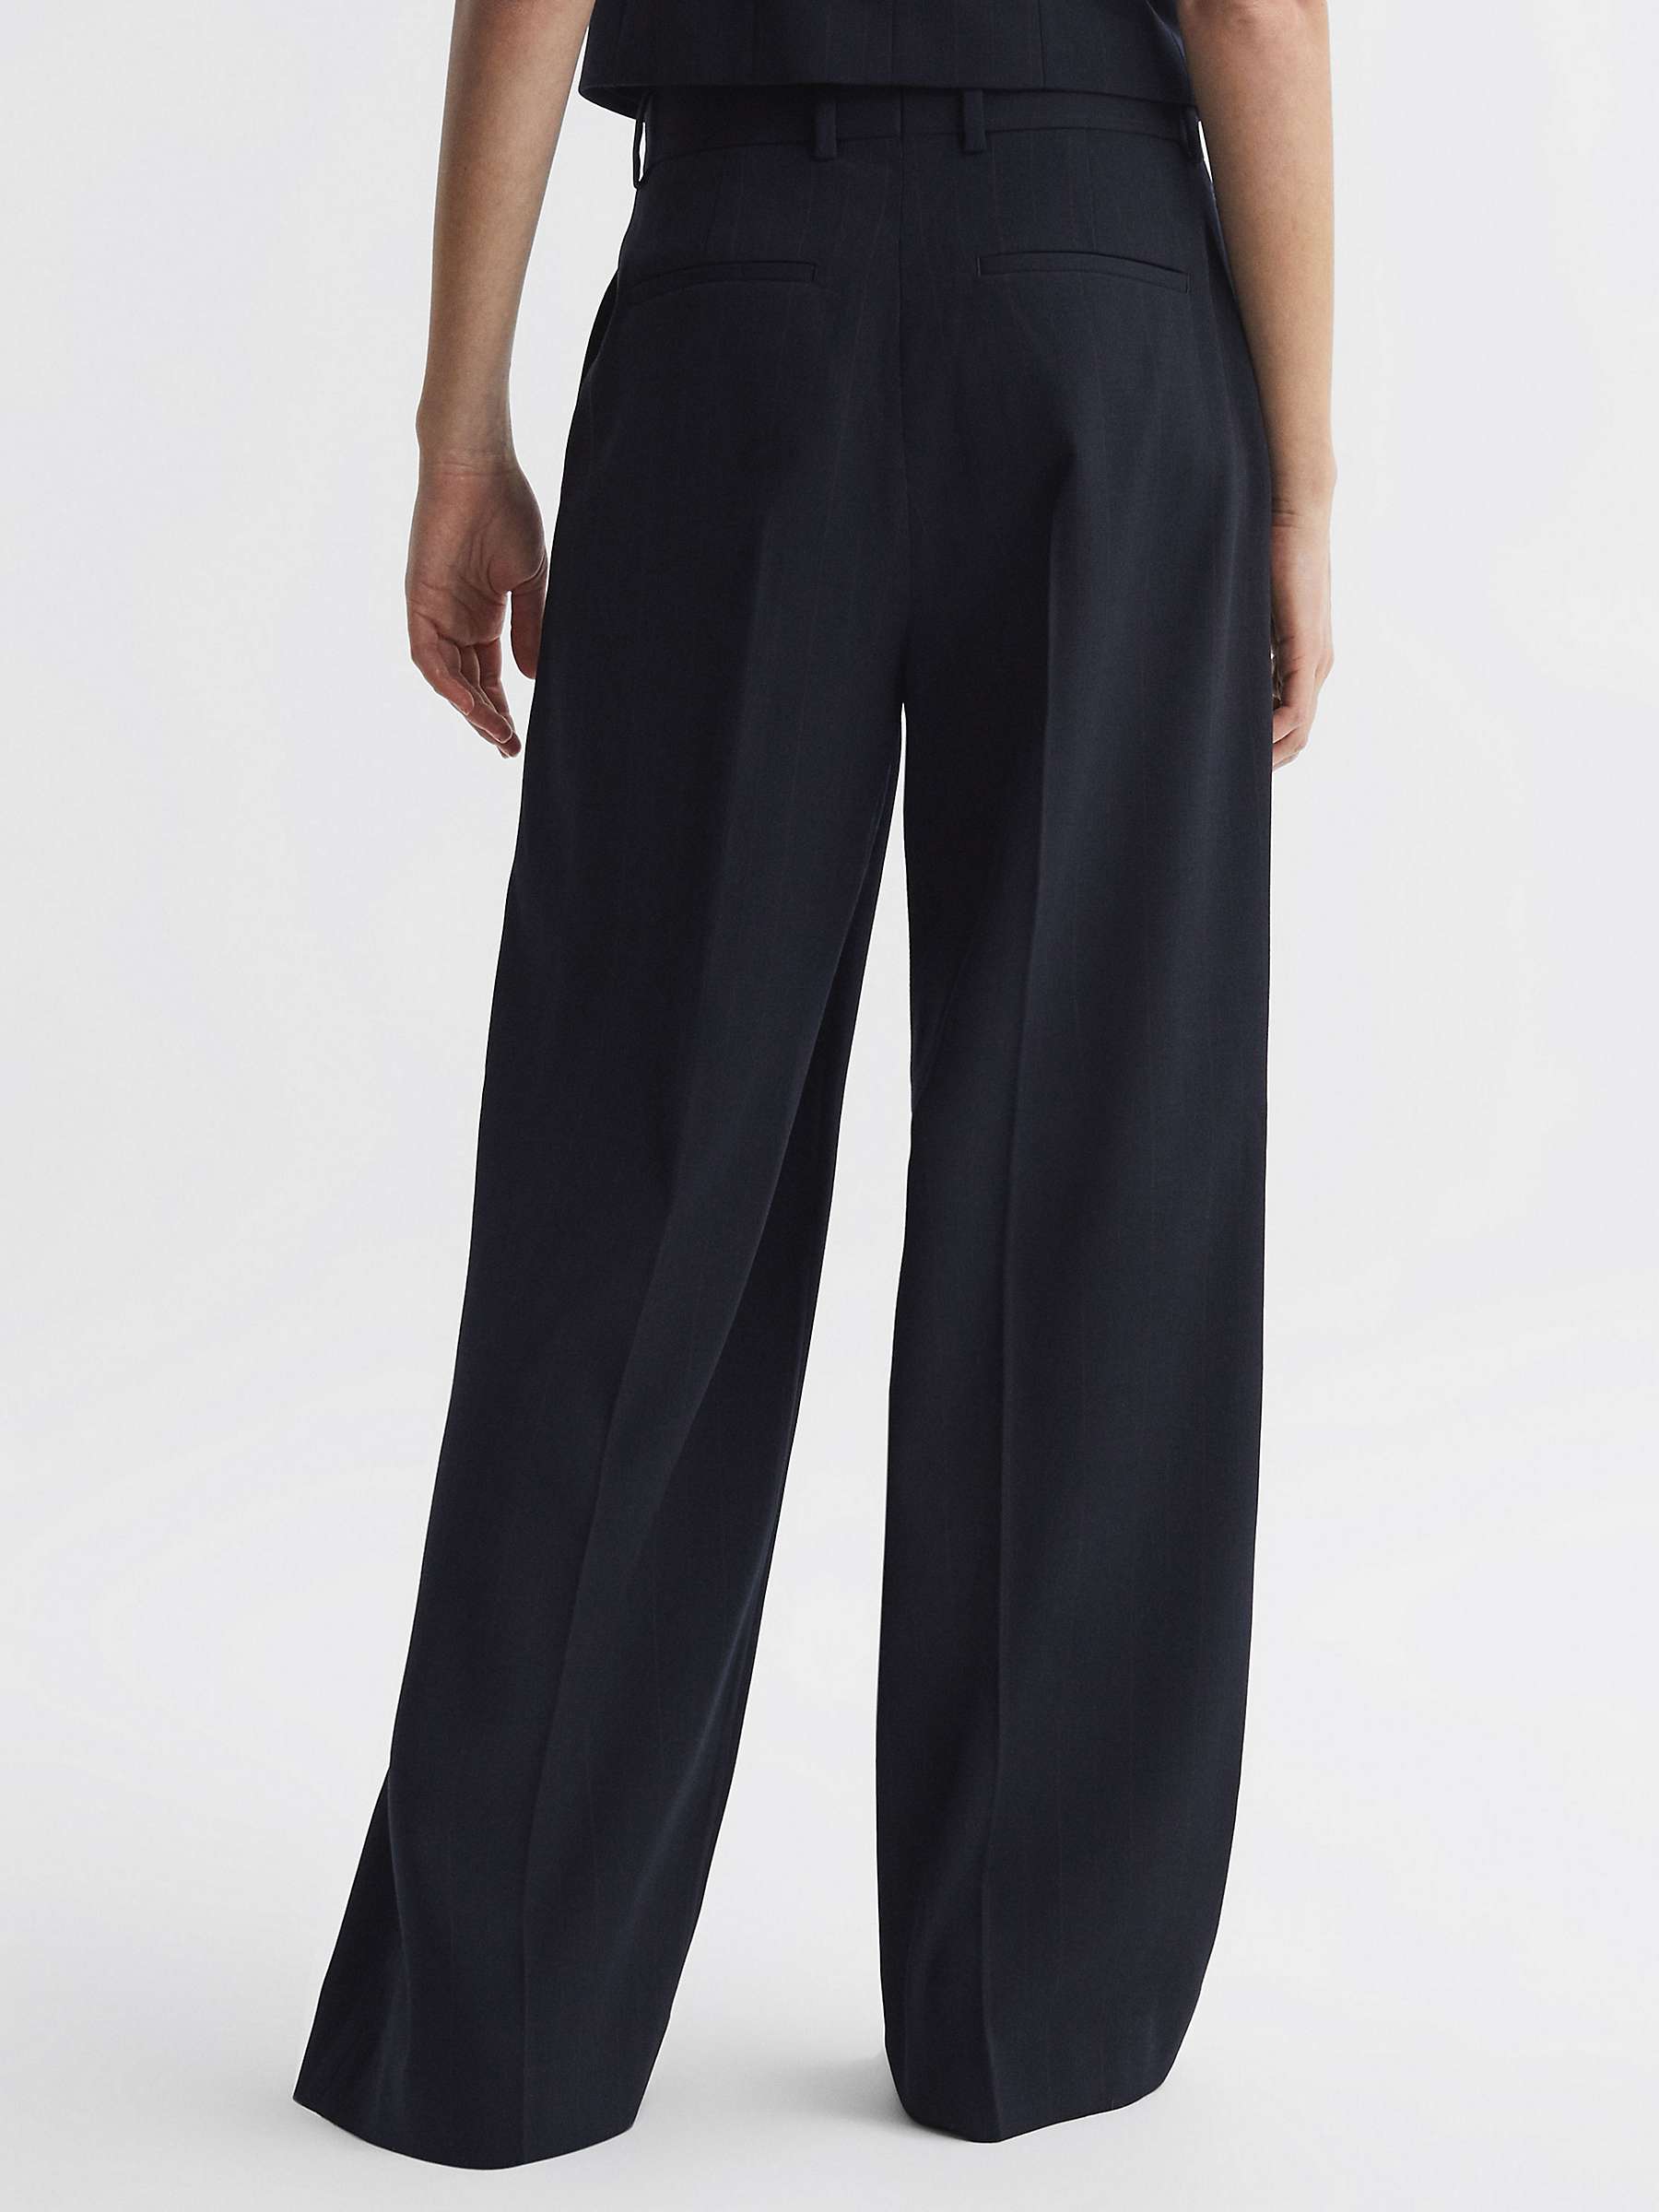 Buy Reiss Willow Pinstripe Wool Blend Tailored Trousers, Navy Online at johnlewis.com